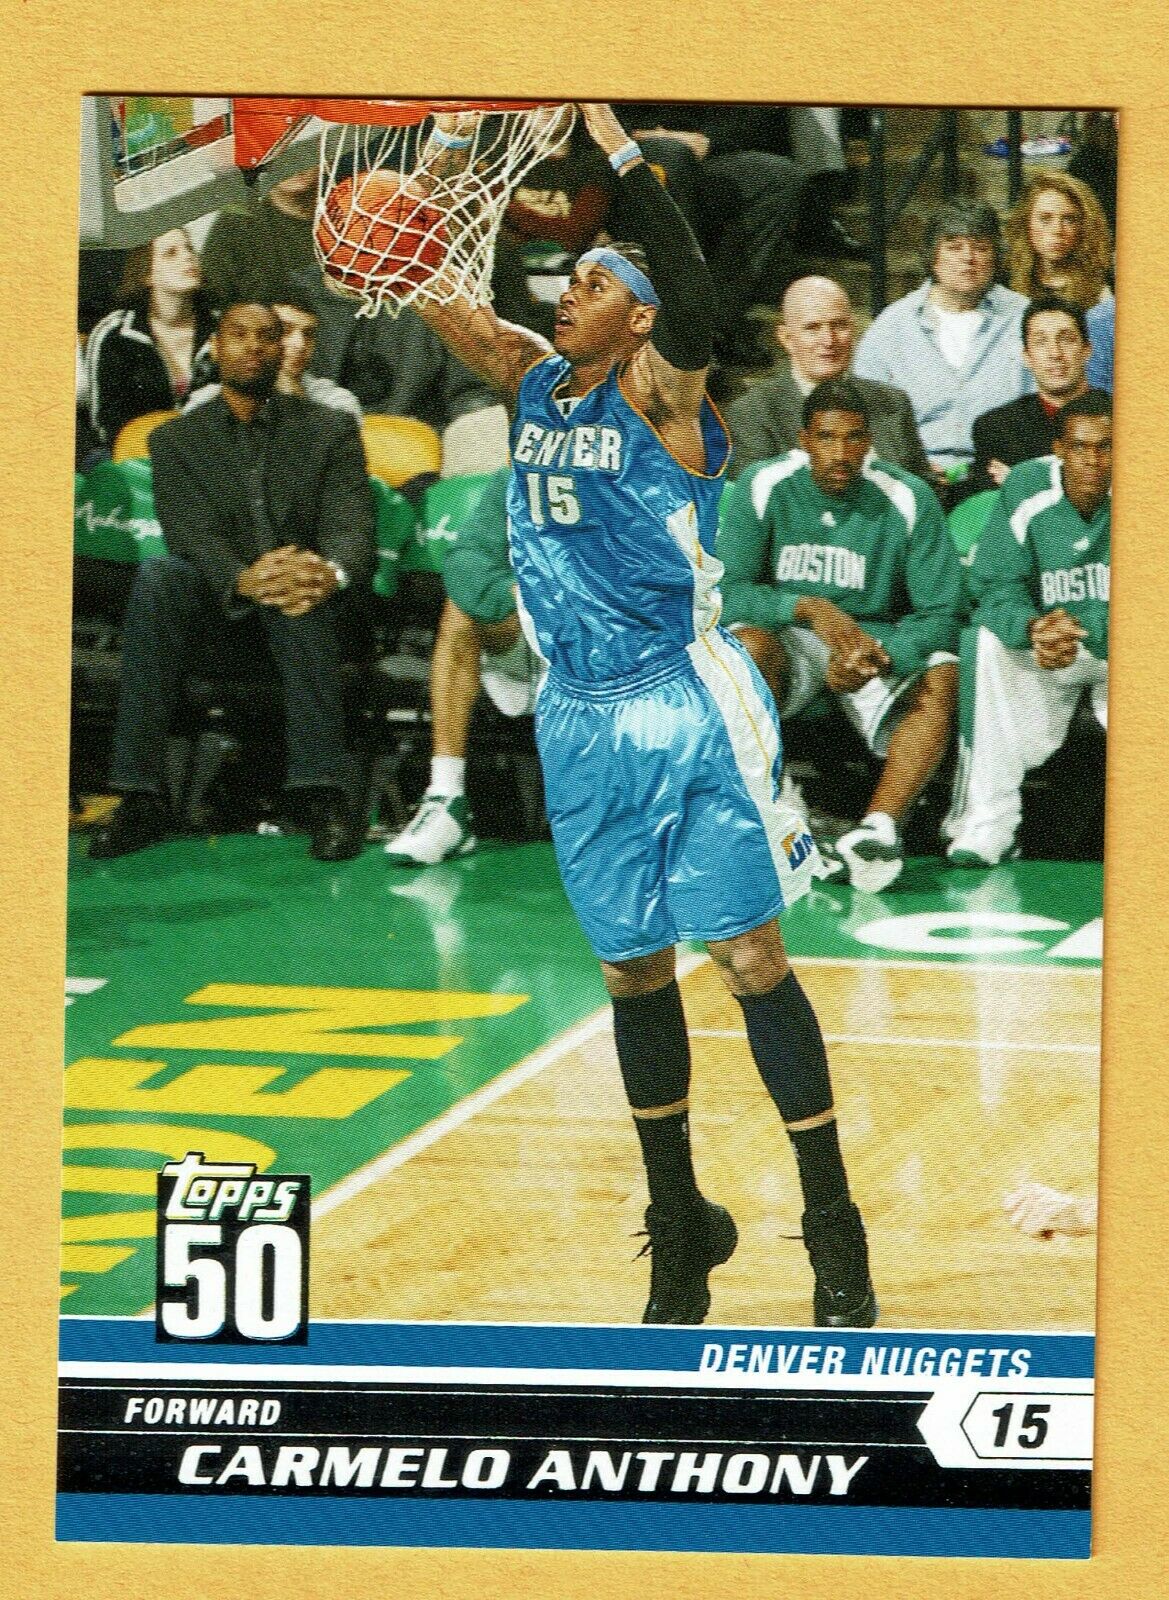 Sold at Auction: 2007-08 Topps 50th Anniversary Carmelo Anthony Insert Card  #15